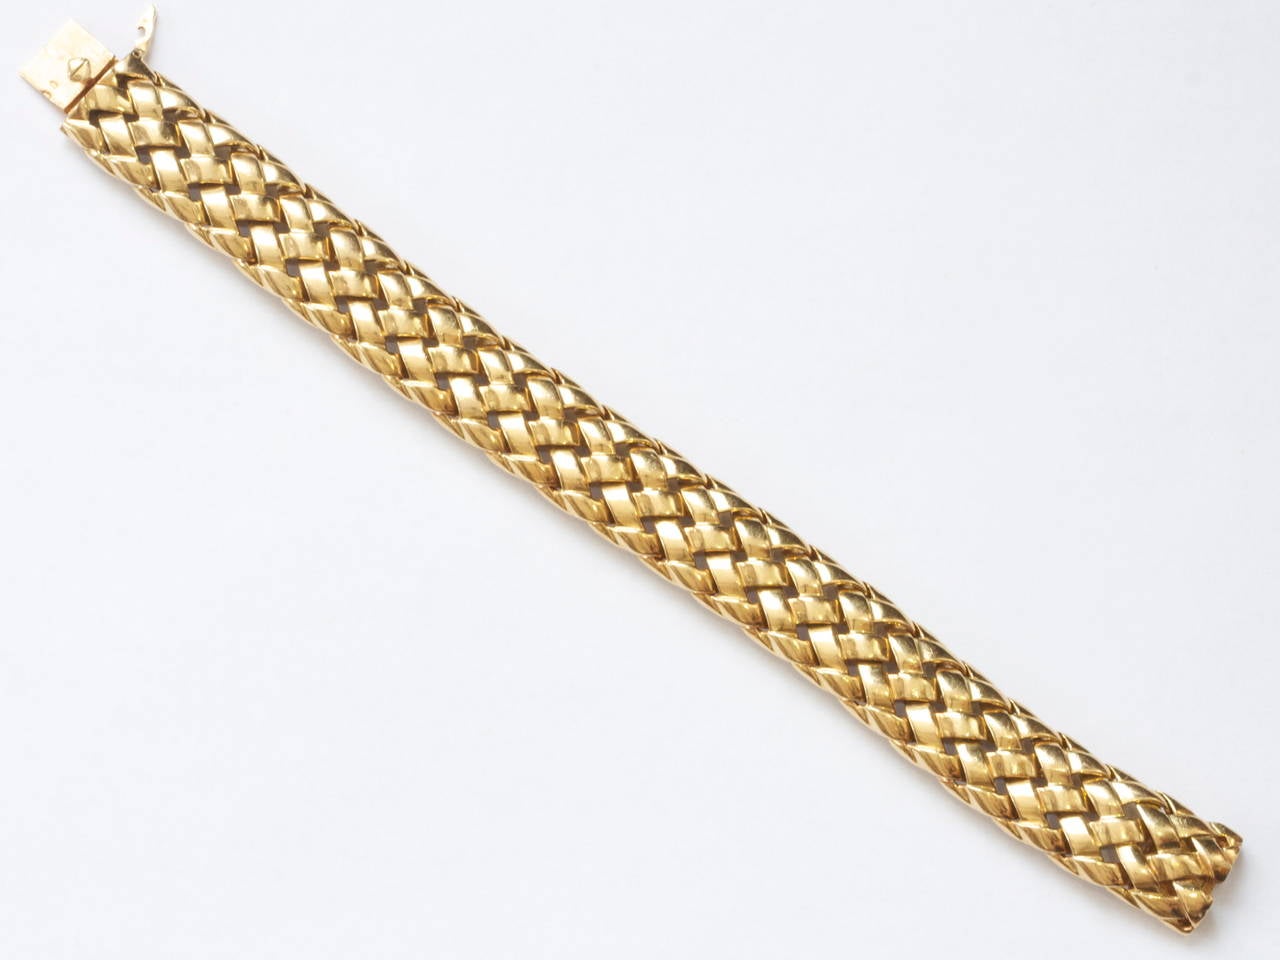 A classic and timeless design from the Van Cleef & Arpels jewelry house. The gold has been delicately woven throughout the bracelet showing the attention to detail it took to create this fine piece of jewelry. Crafted in 18k gold with original VCA 